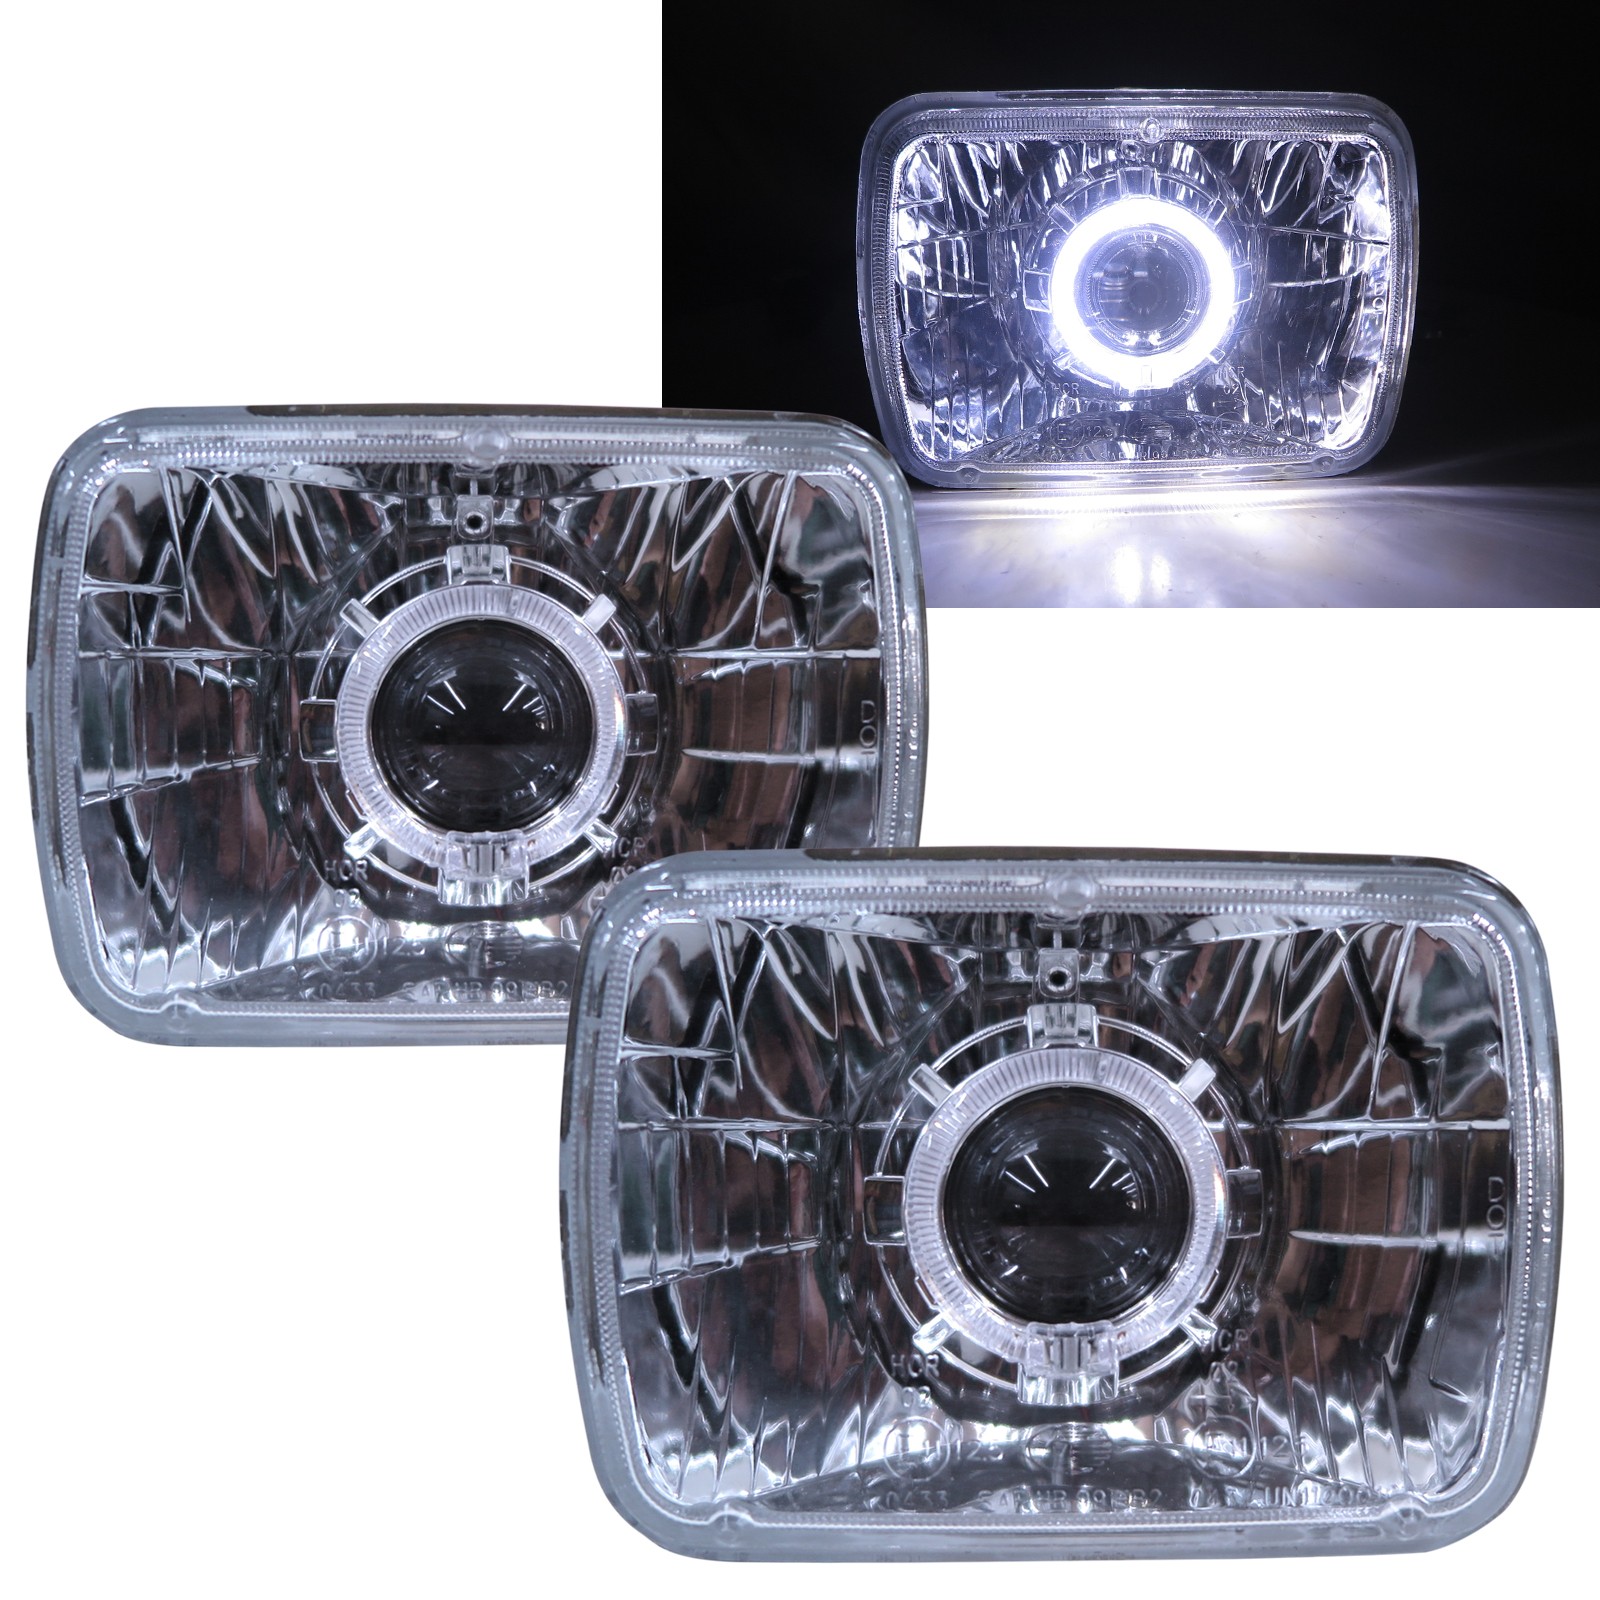 CrazyTheGod Conquest 1984-1986 Coupe 2D Guide LED Angel-Eye Headlight Headlamp Chrome for DODGE RHD